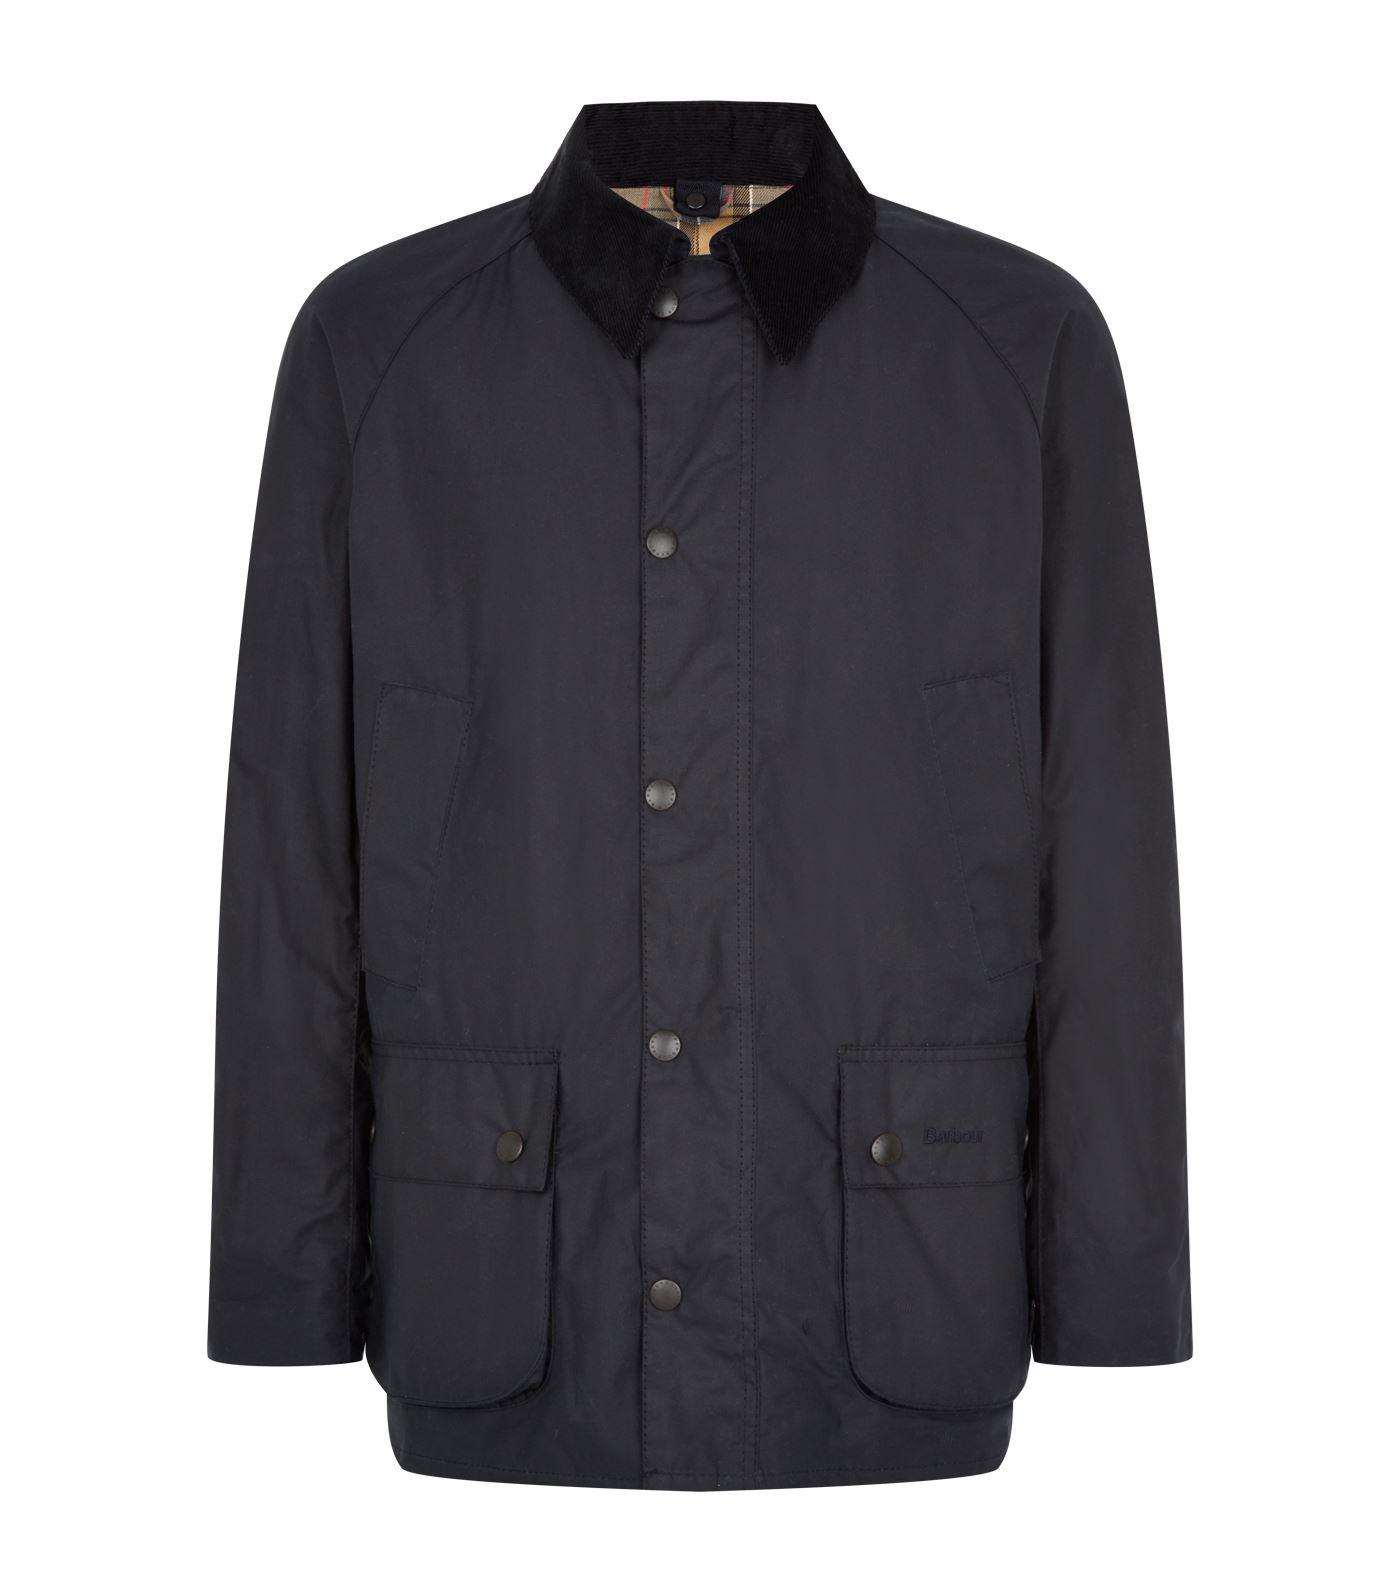 Barbour Ashby Waxed Jacket in Blue for Men - Lyst